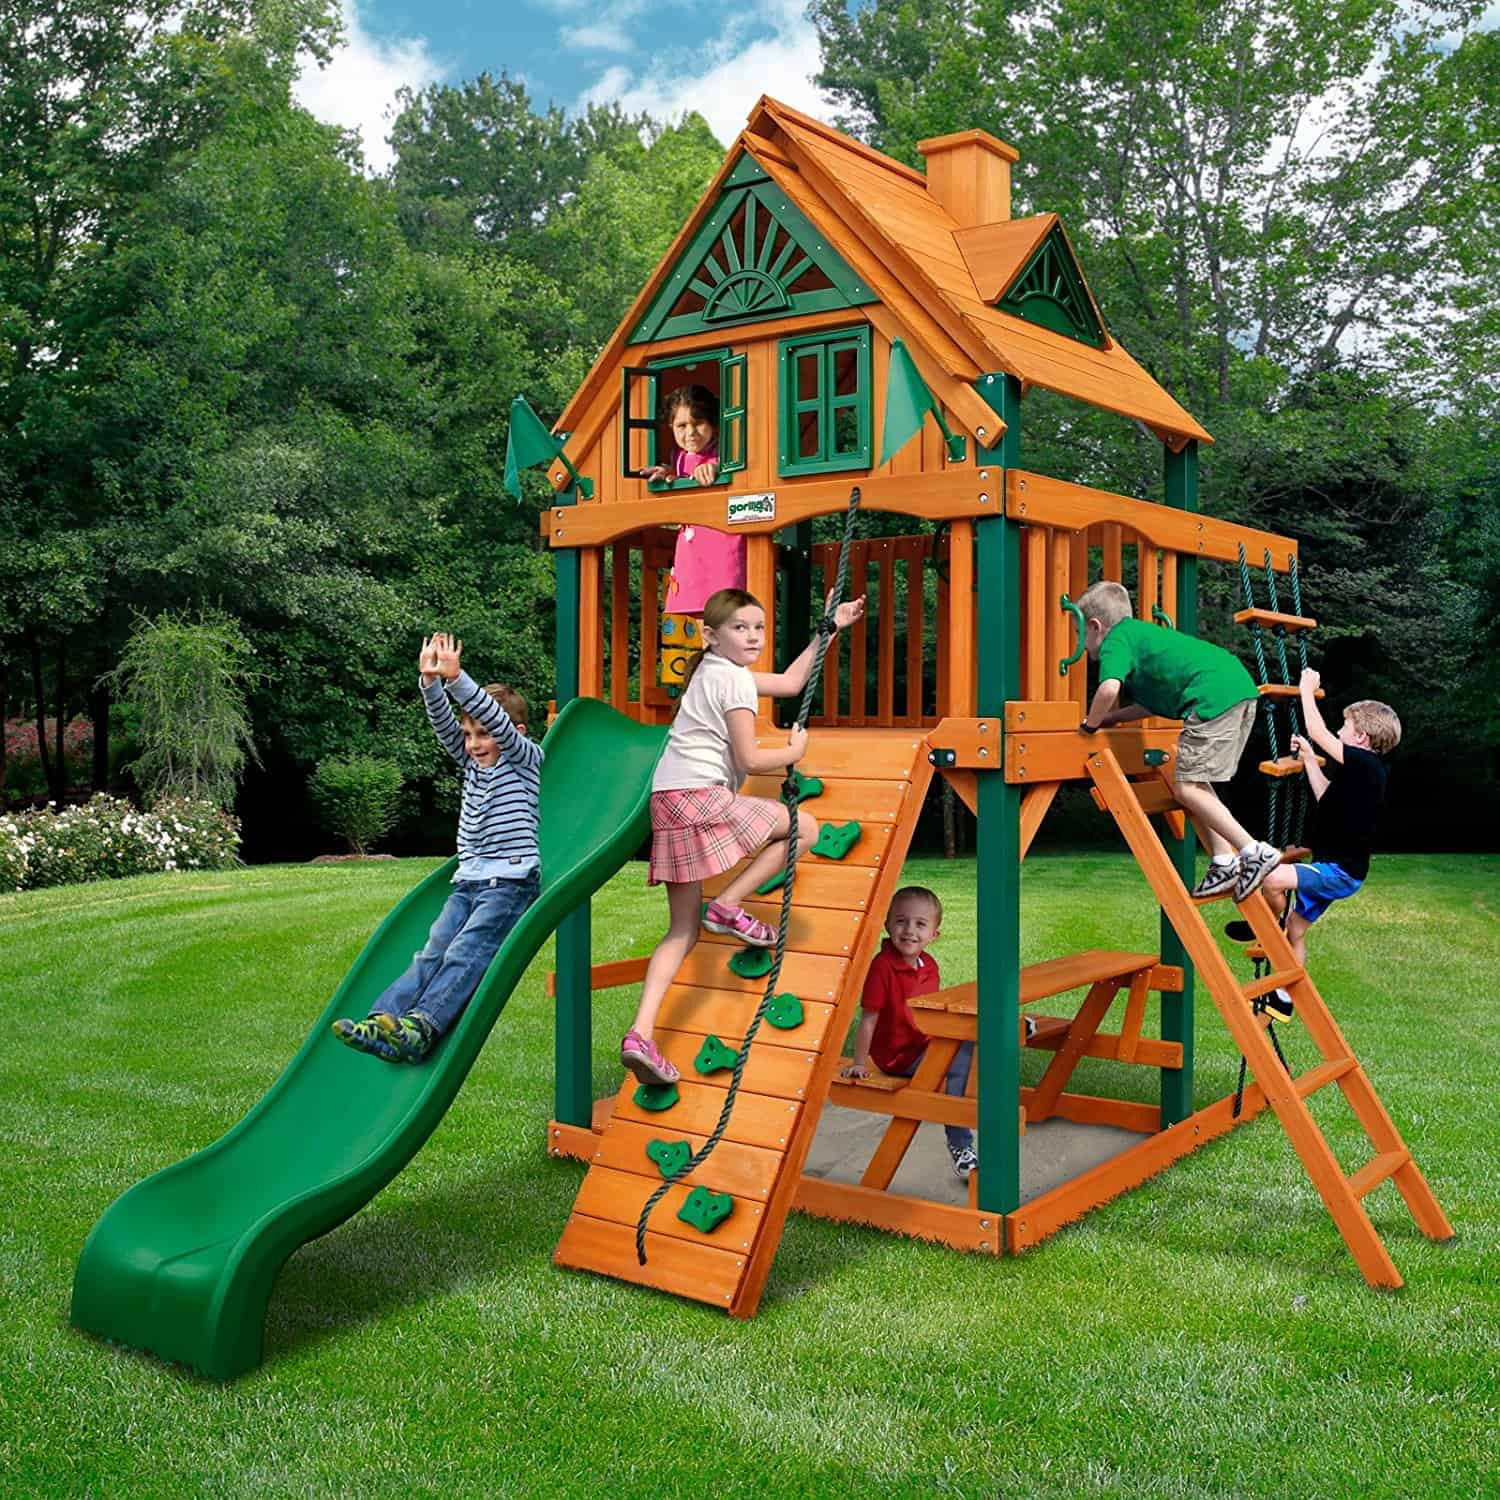 Kids Outdoor Playset Inspirational Swing Sets For Small Yards The Backyard Site Of Kids Outdoor Playset 